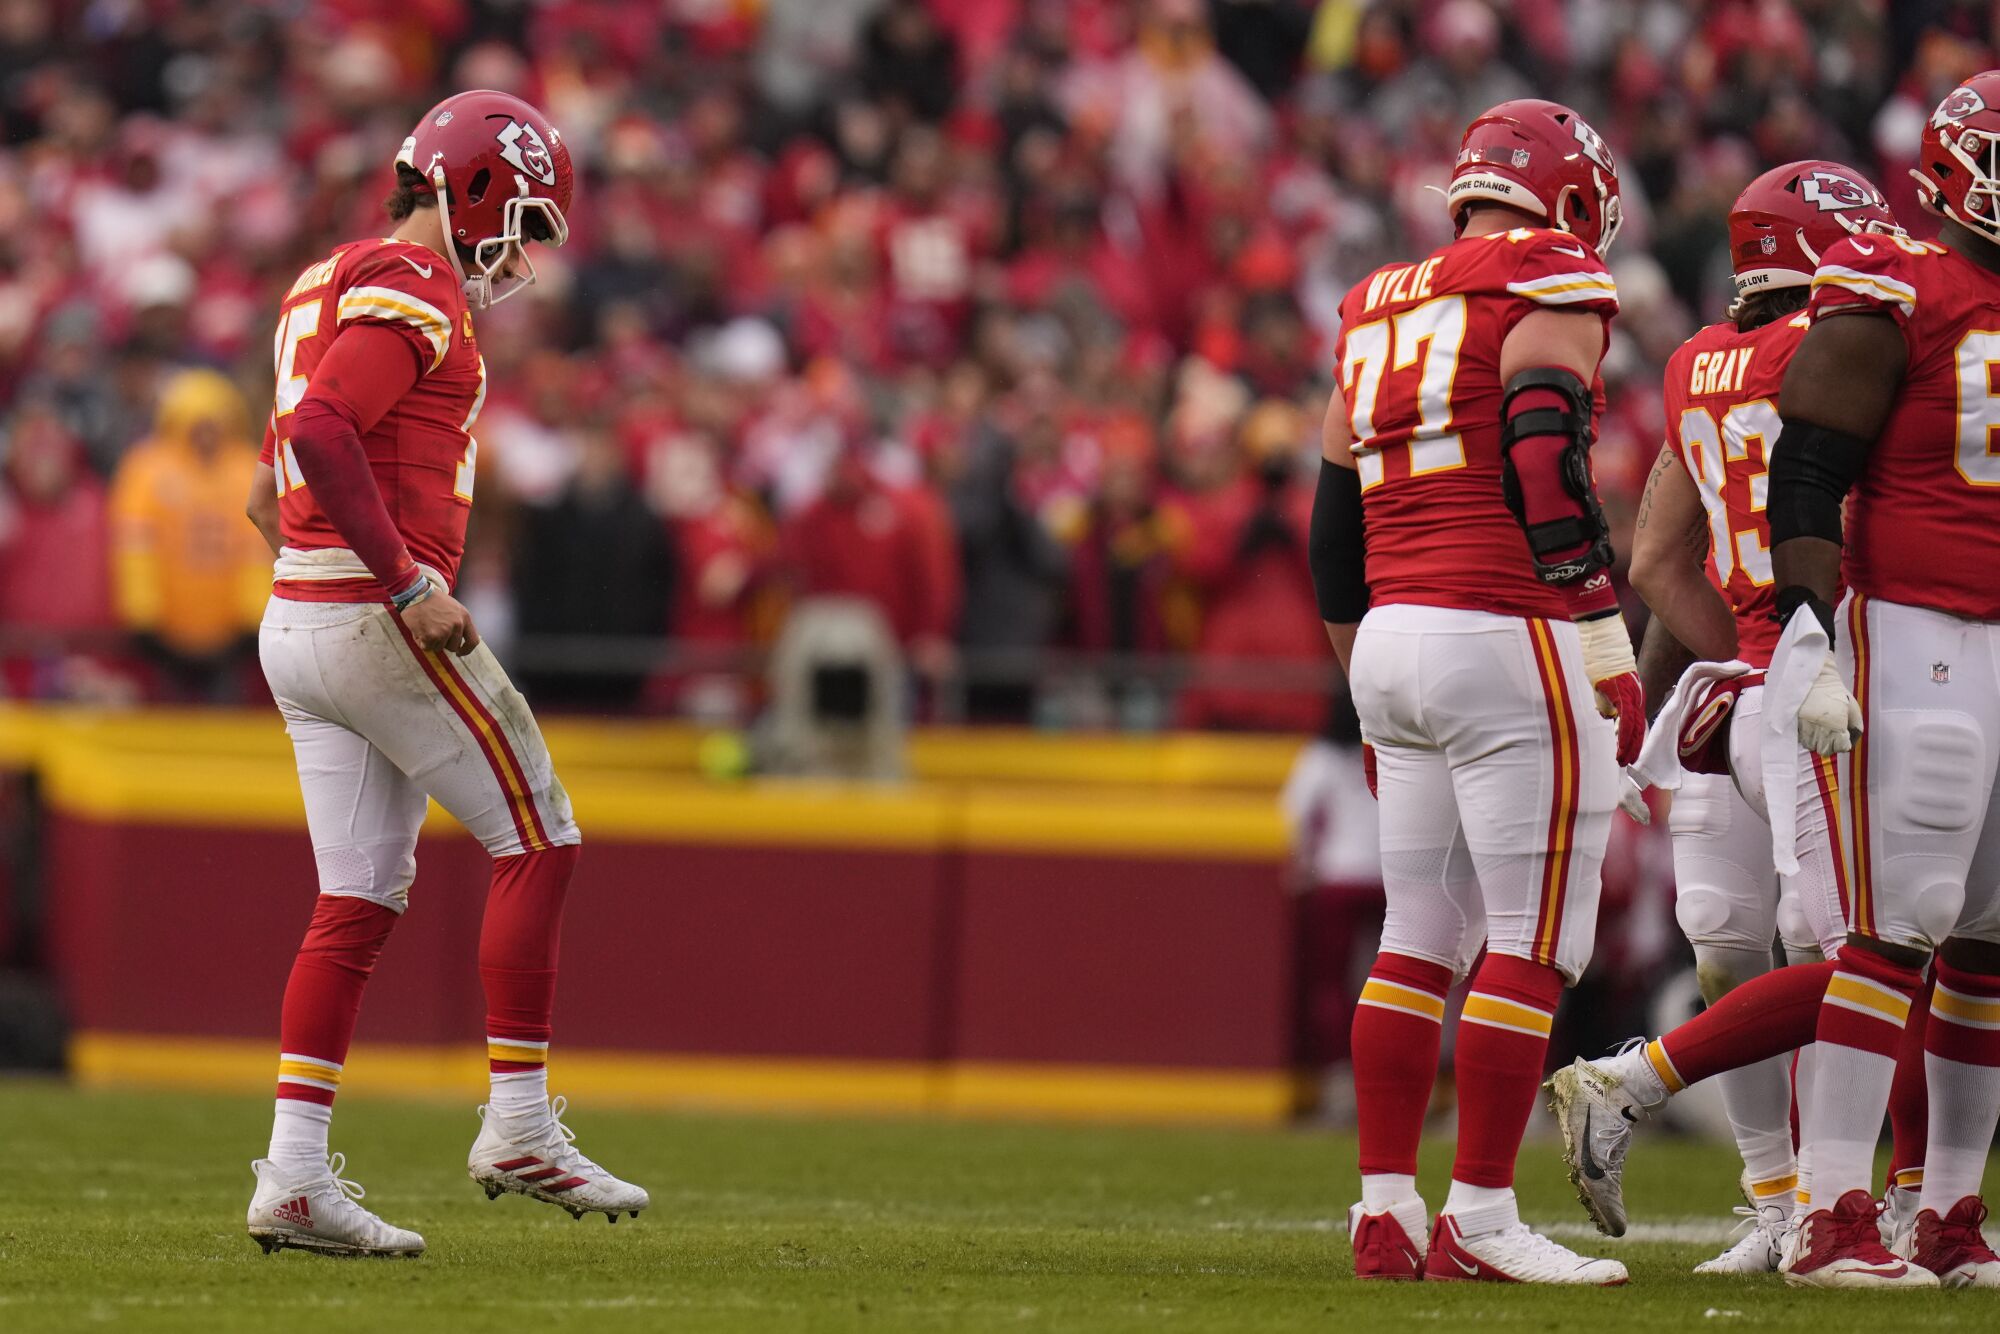 Chiefs quarterback Patrick Mahomes limps back to the huddle after injuring his ankle against the Jaguars.